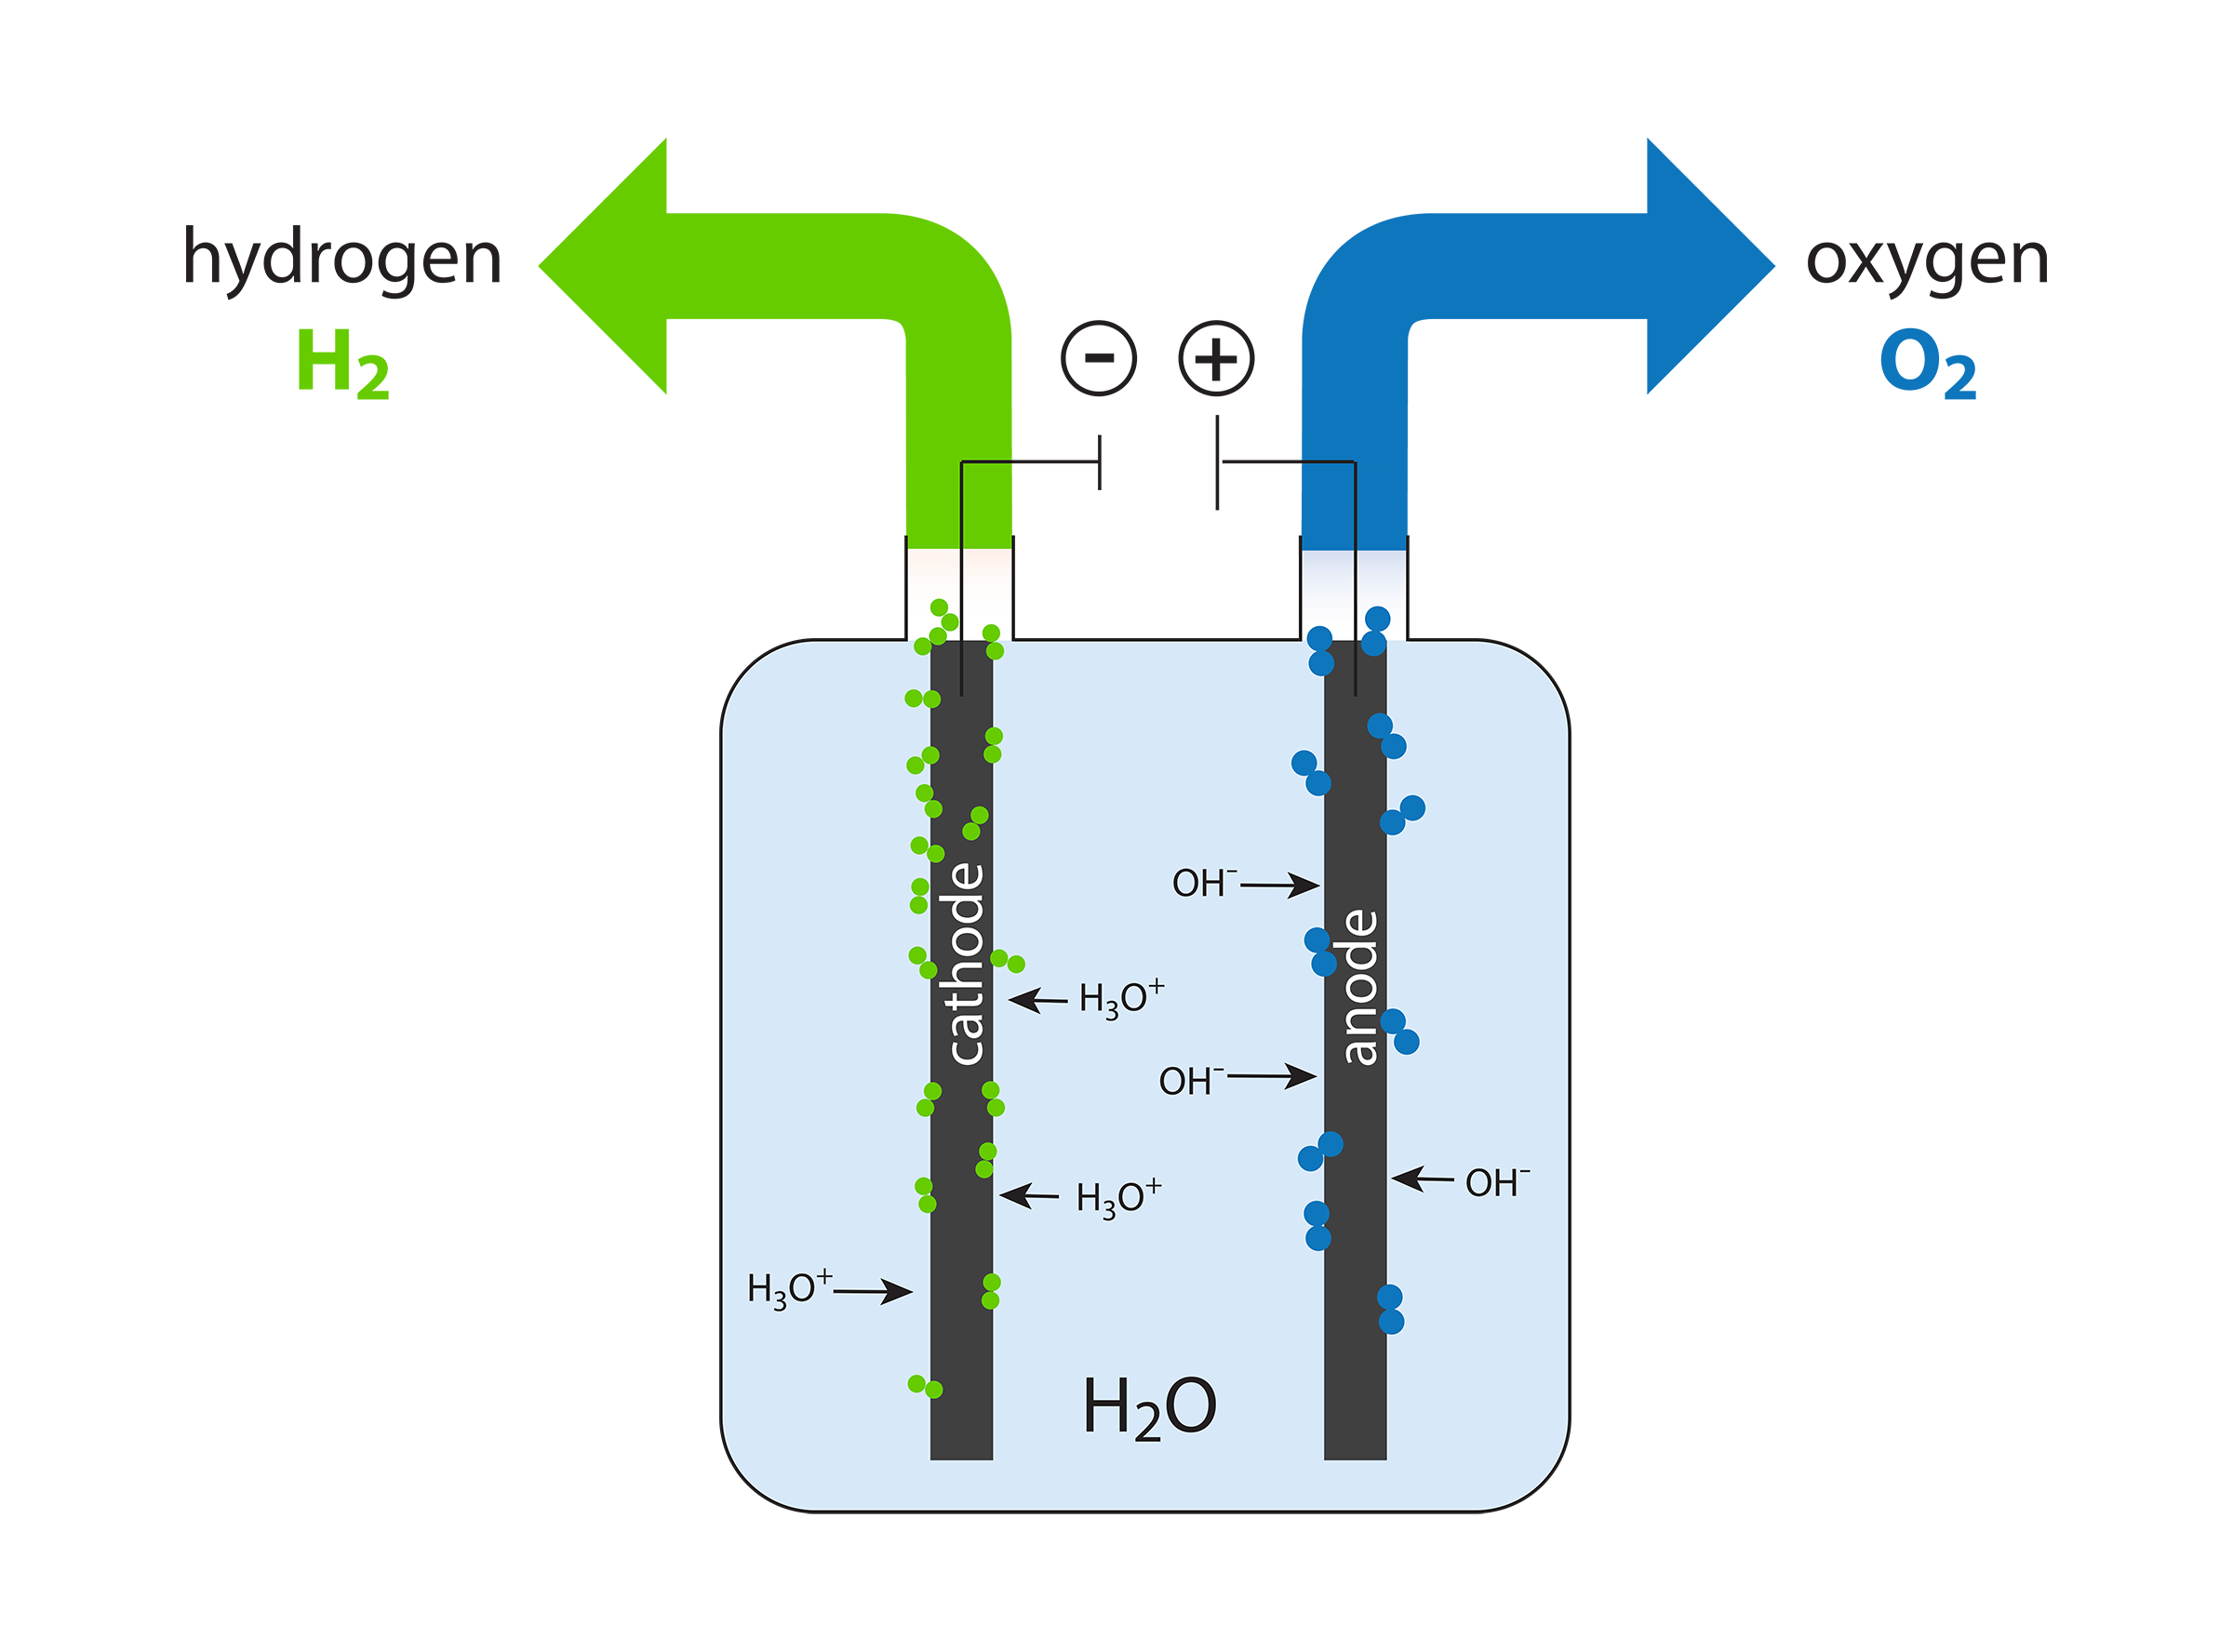 An illustration of the process of electrolysis